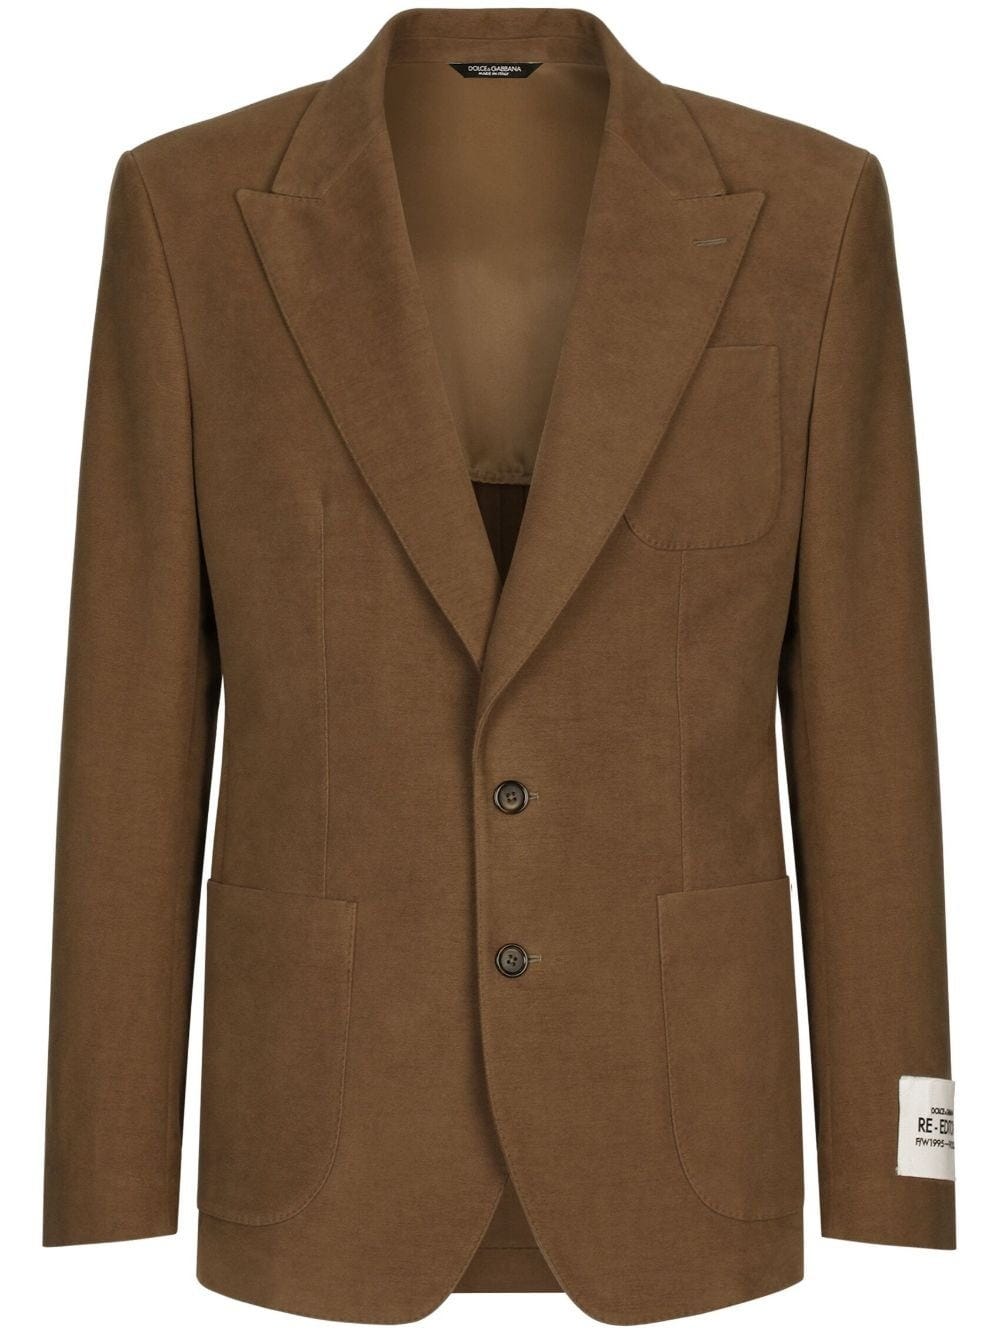 DOLCE & GABBANA BROWN SINGLE-BREASTED JACKET